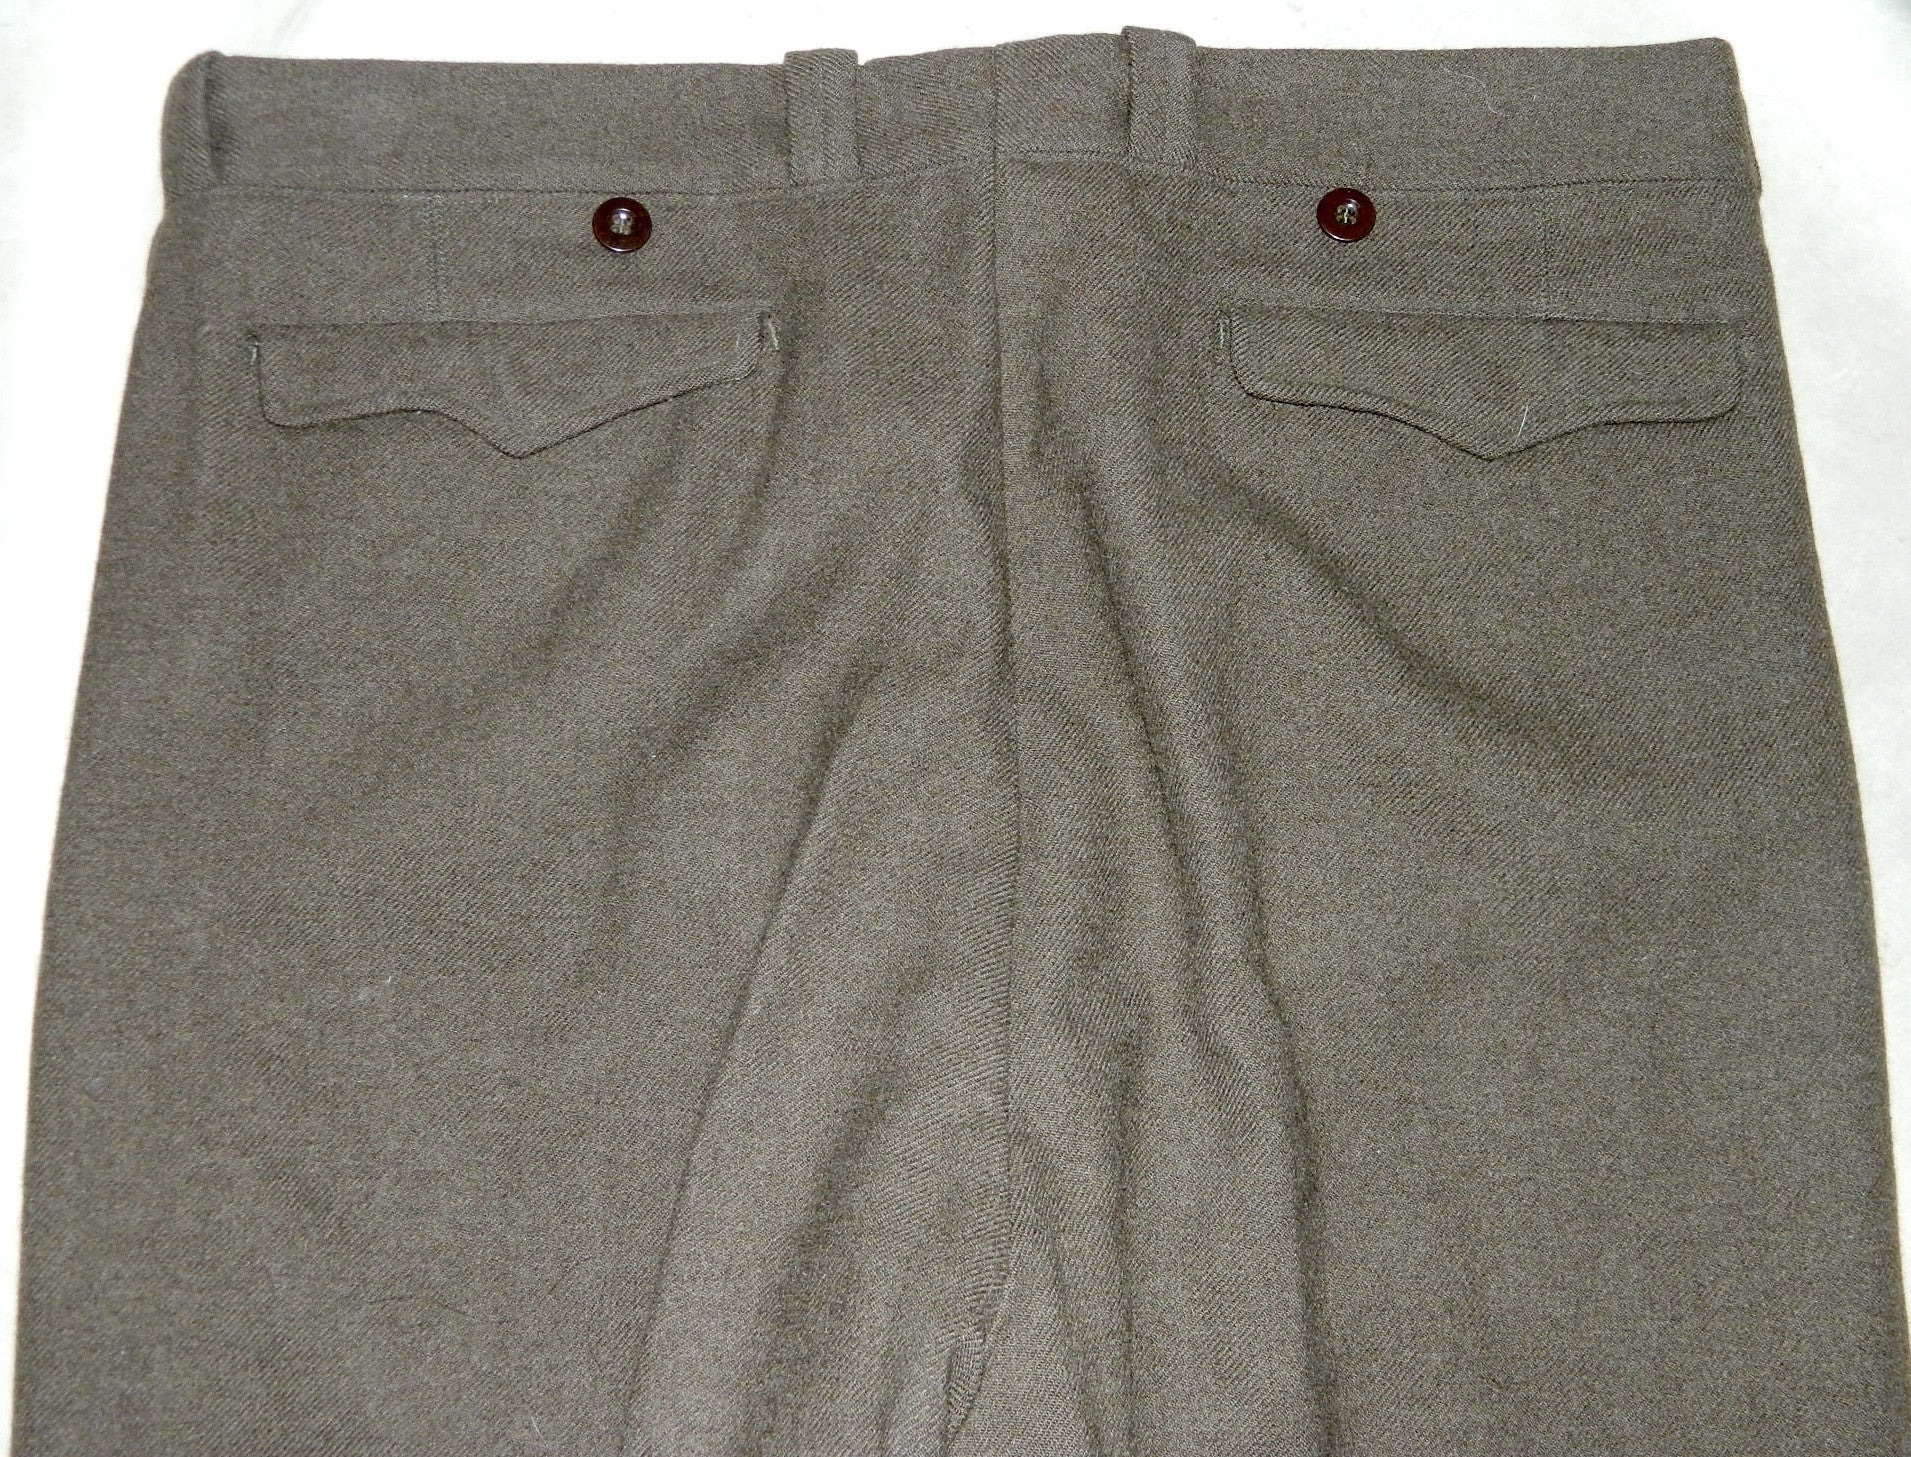 vintage 1940s French military pants WWII wool trousers OD pleated slacks heavy wool 37 inch waist